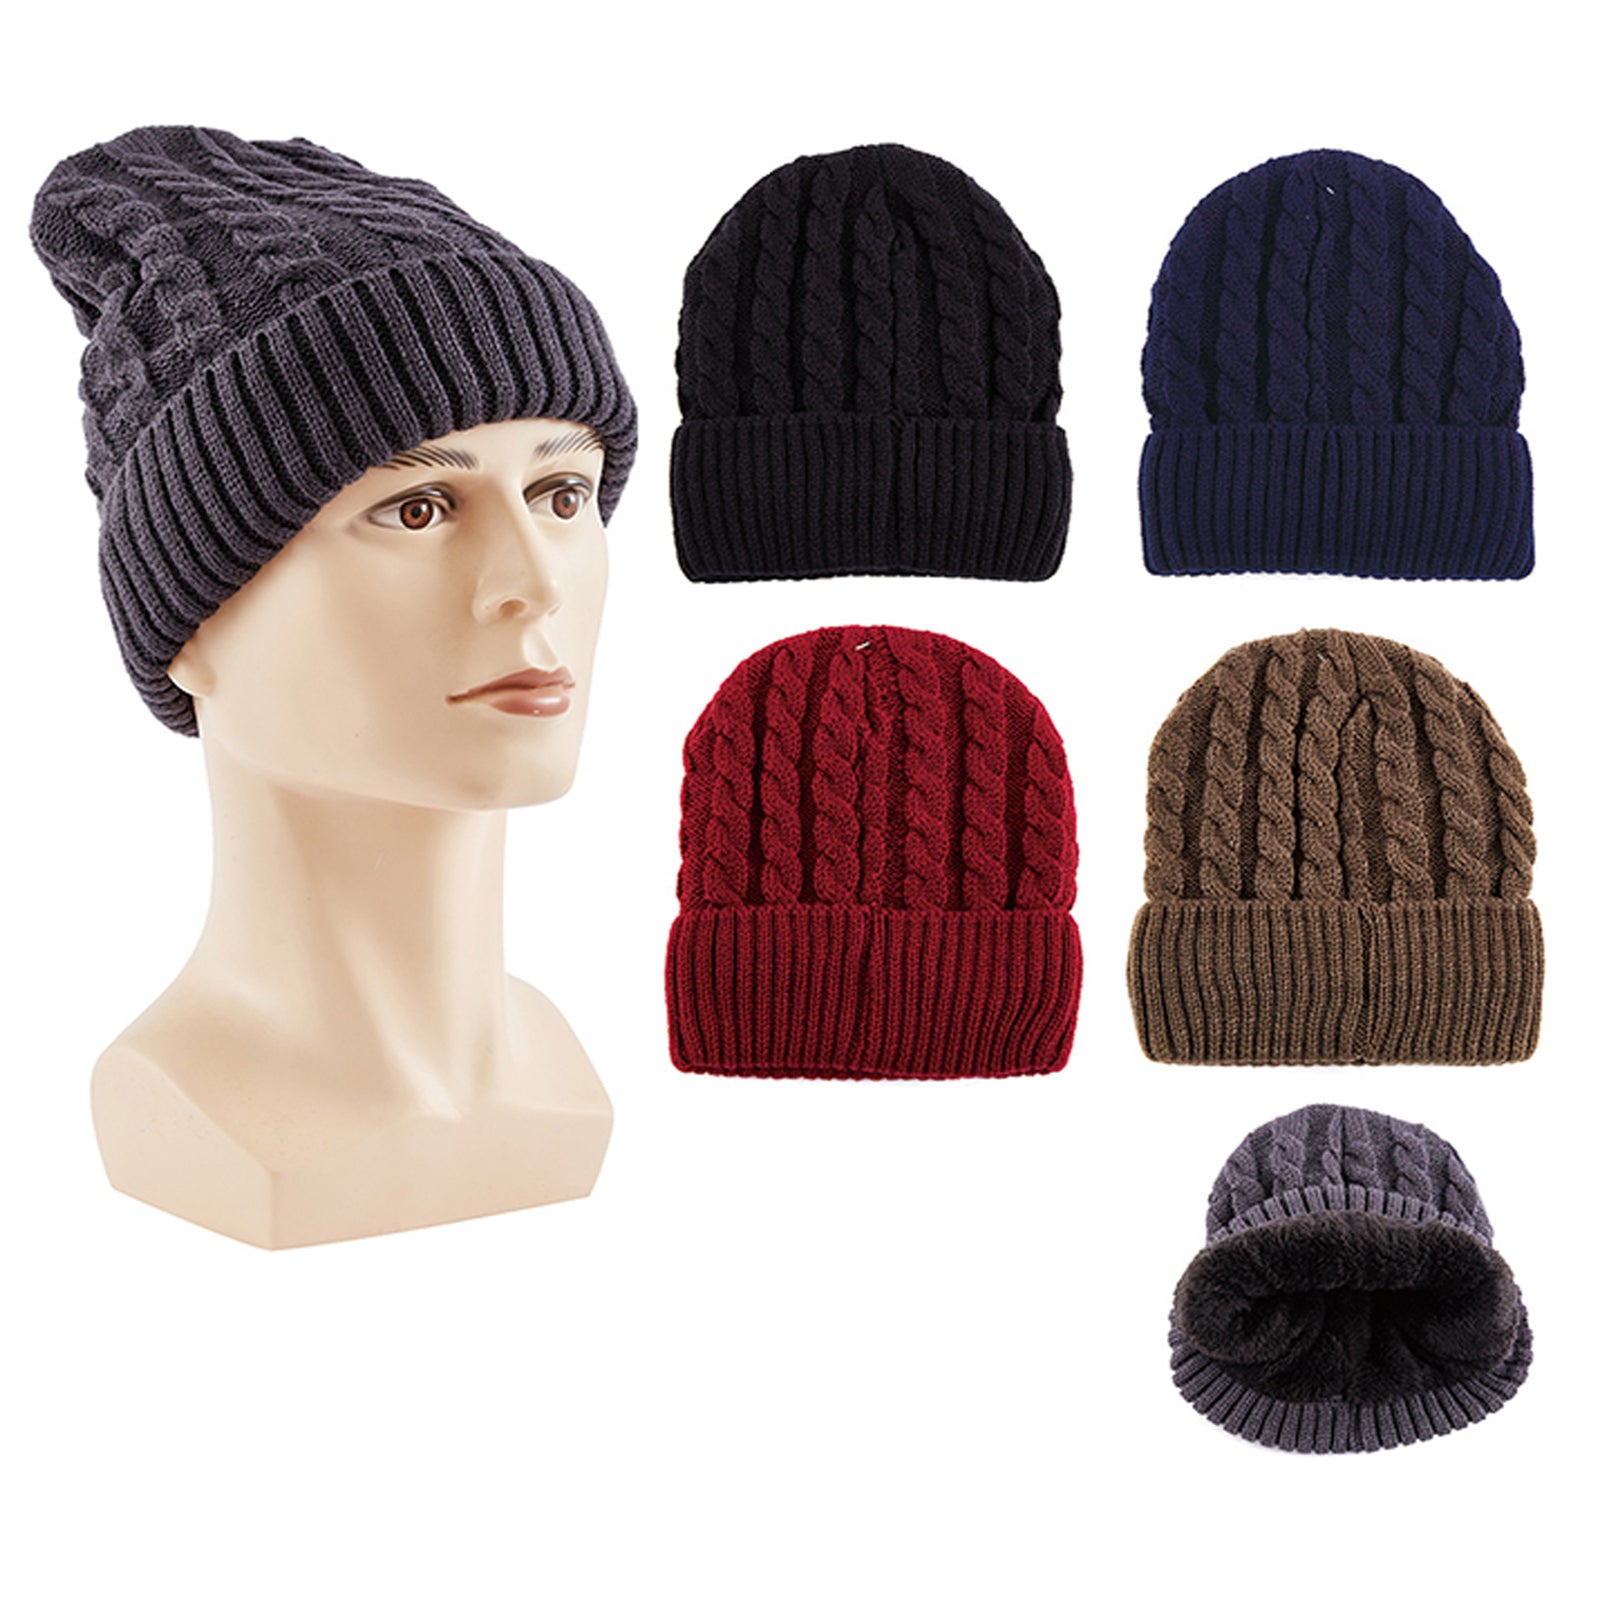 Wholesale Clothing Accessories Twist Men's Winter Hat With Fur Inside NH284